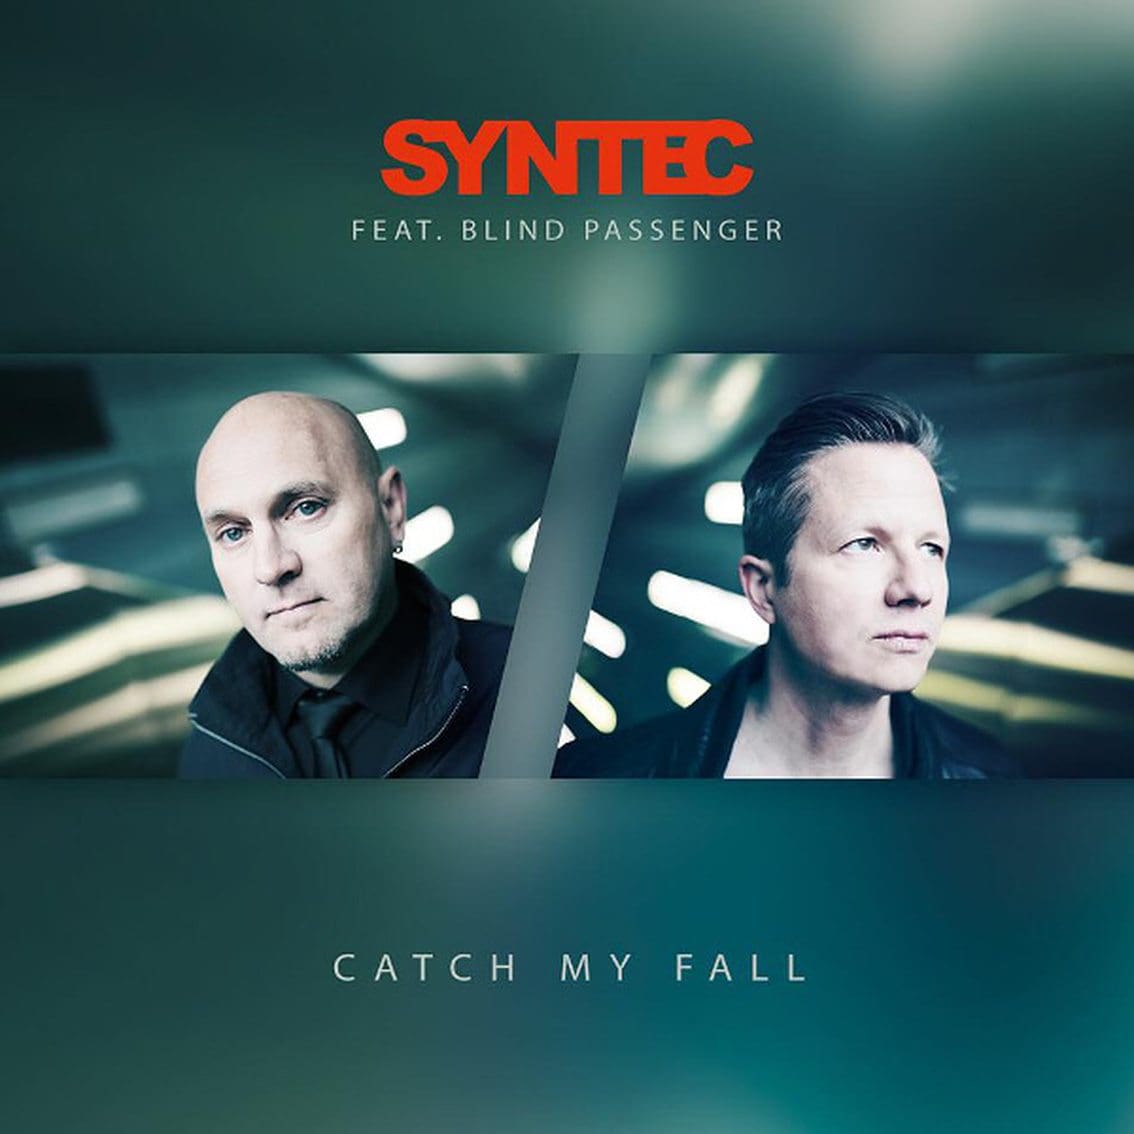 Syntec hint at new album with new 'Catch my fall' single